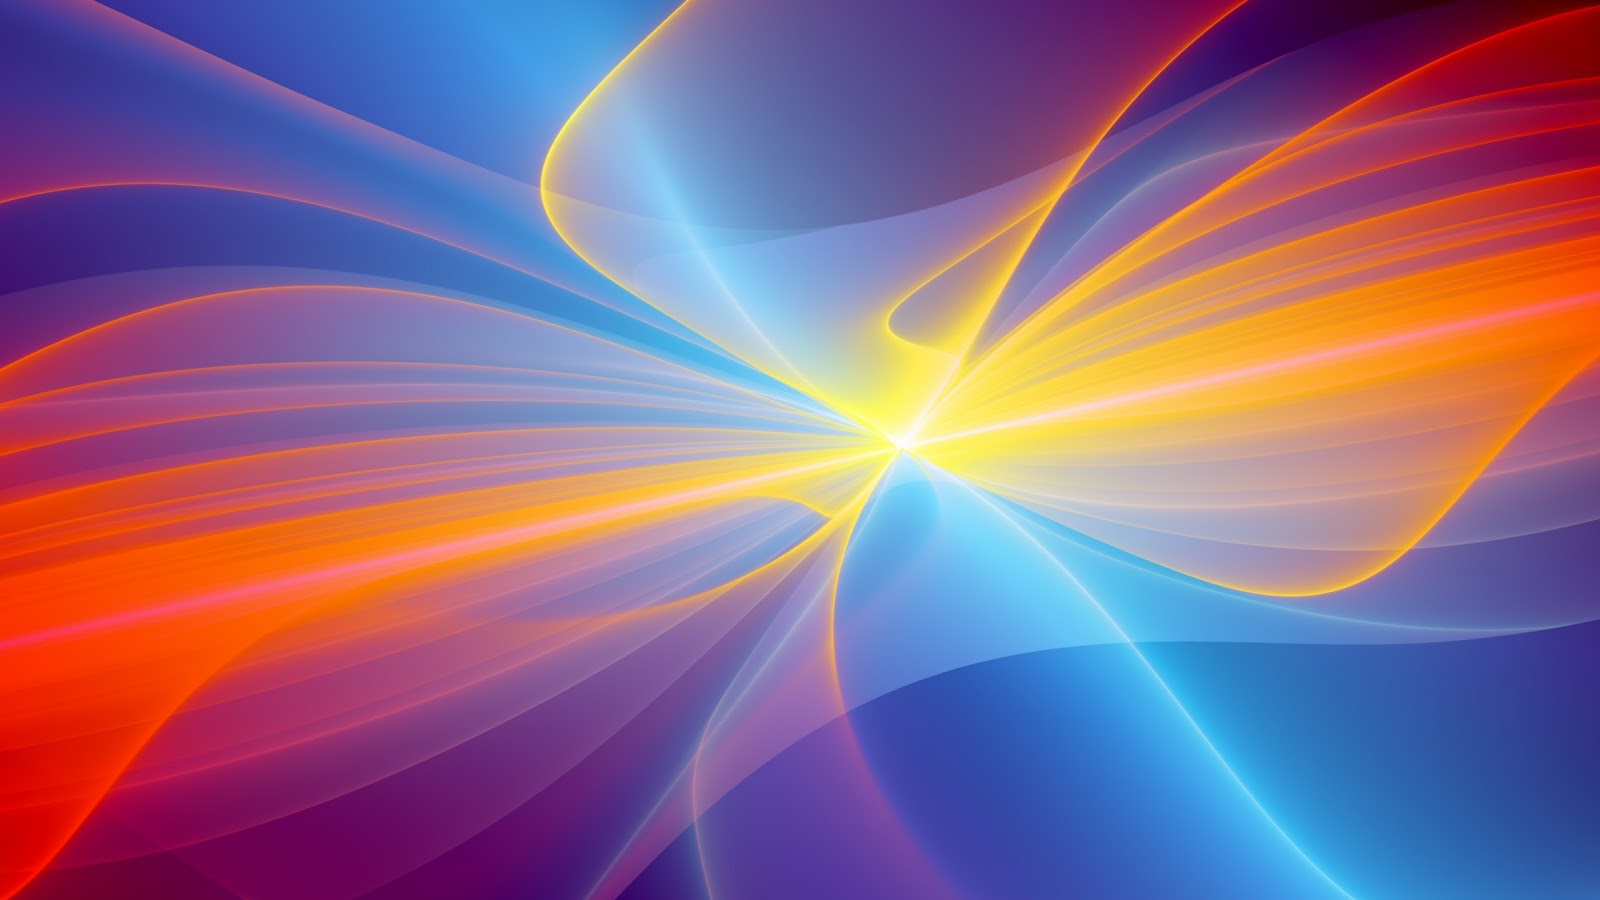 High Definition Photo And Wallpapers: colorful abstract wallpapers ...